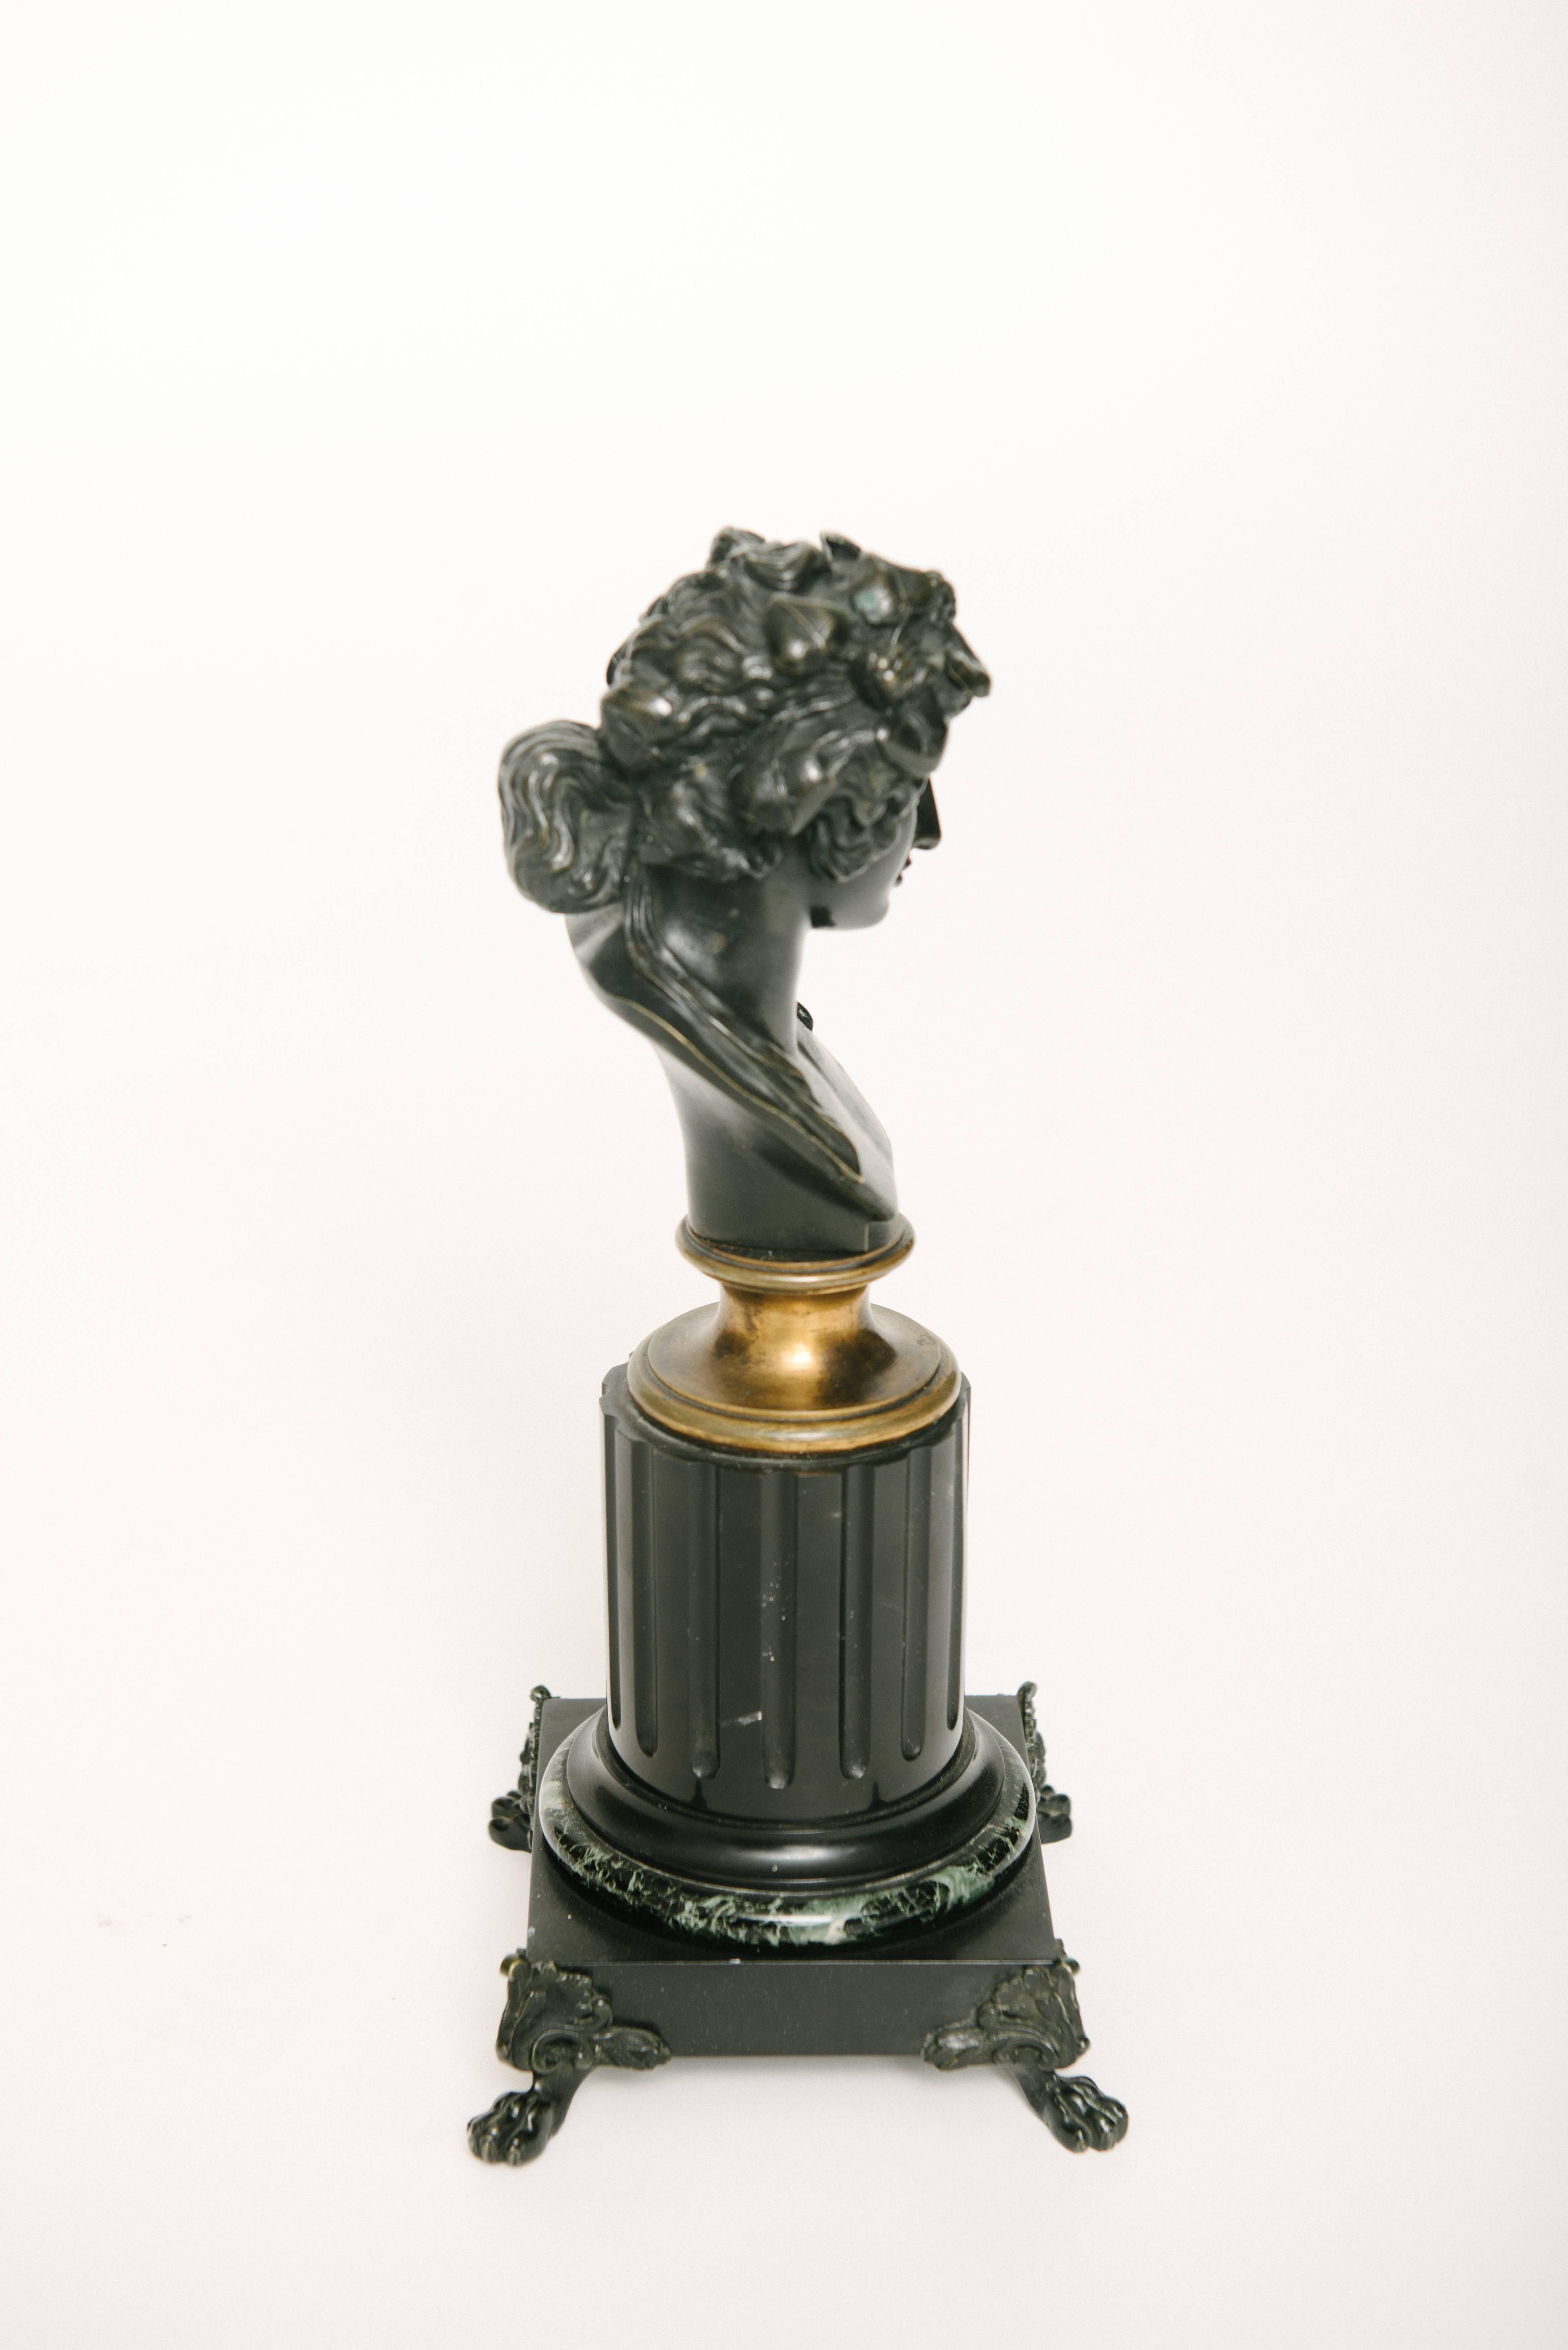 Pair of 19th century French patinated bronze busts on marble bases.